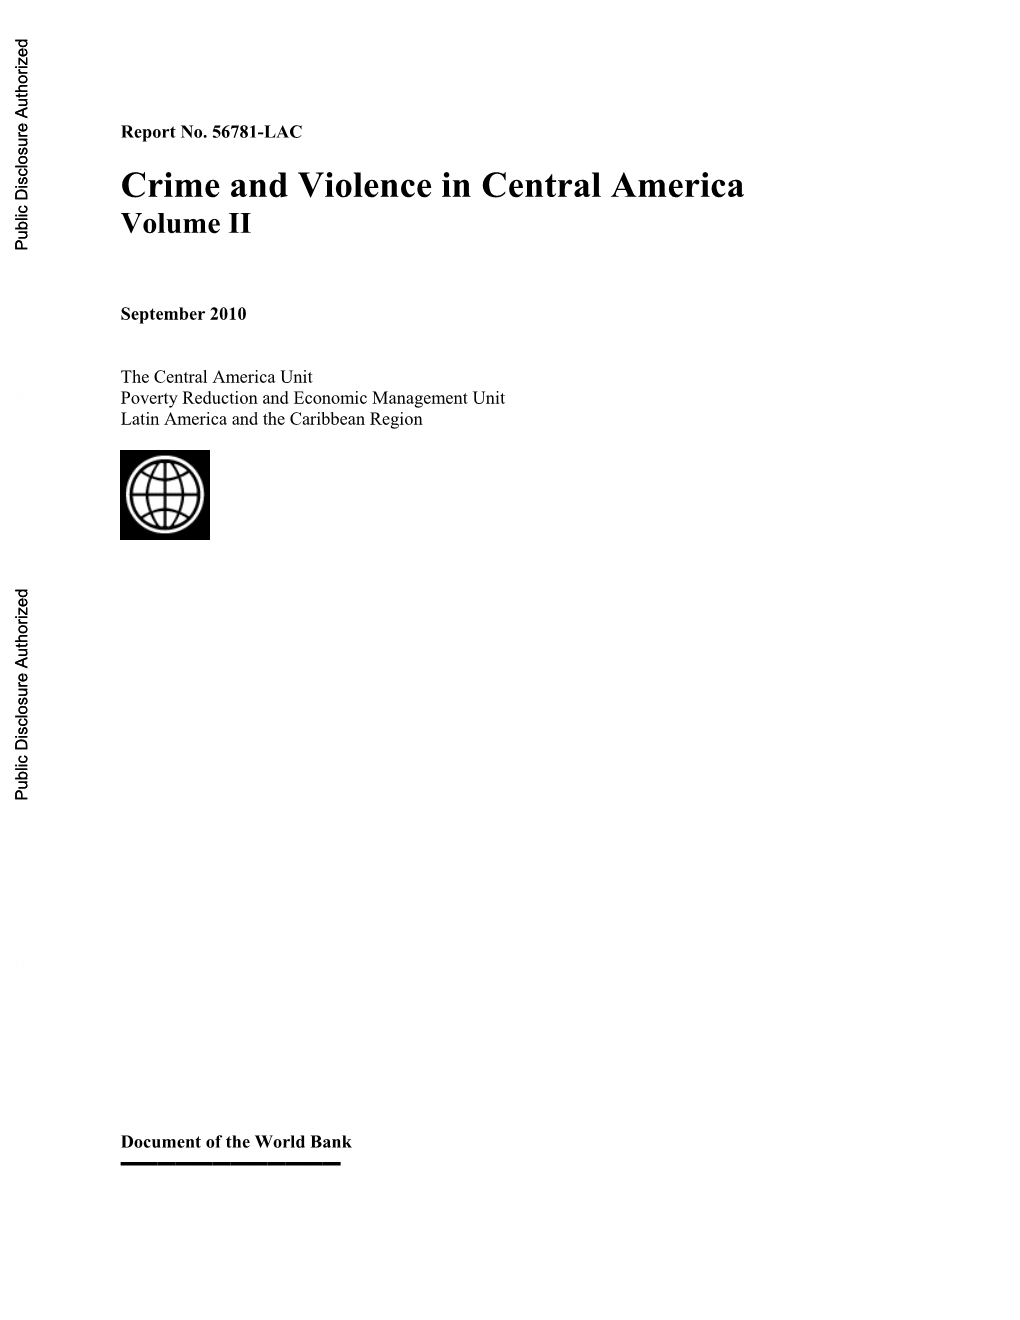 Crime and Violence in Central America Volume II